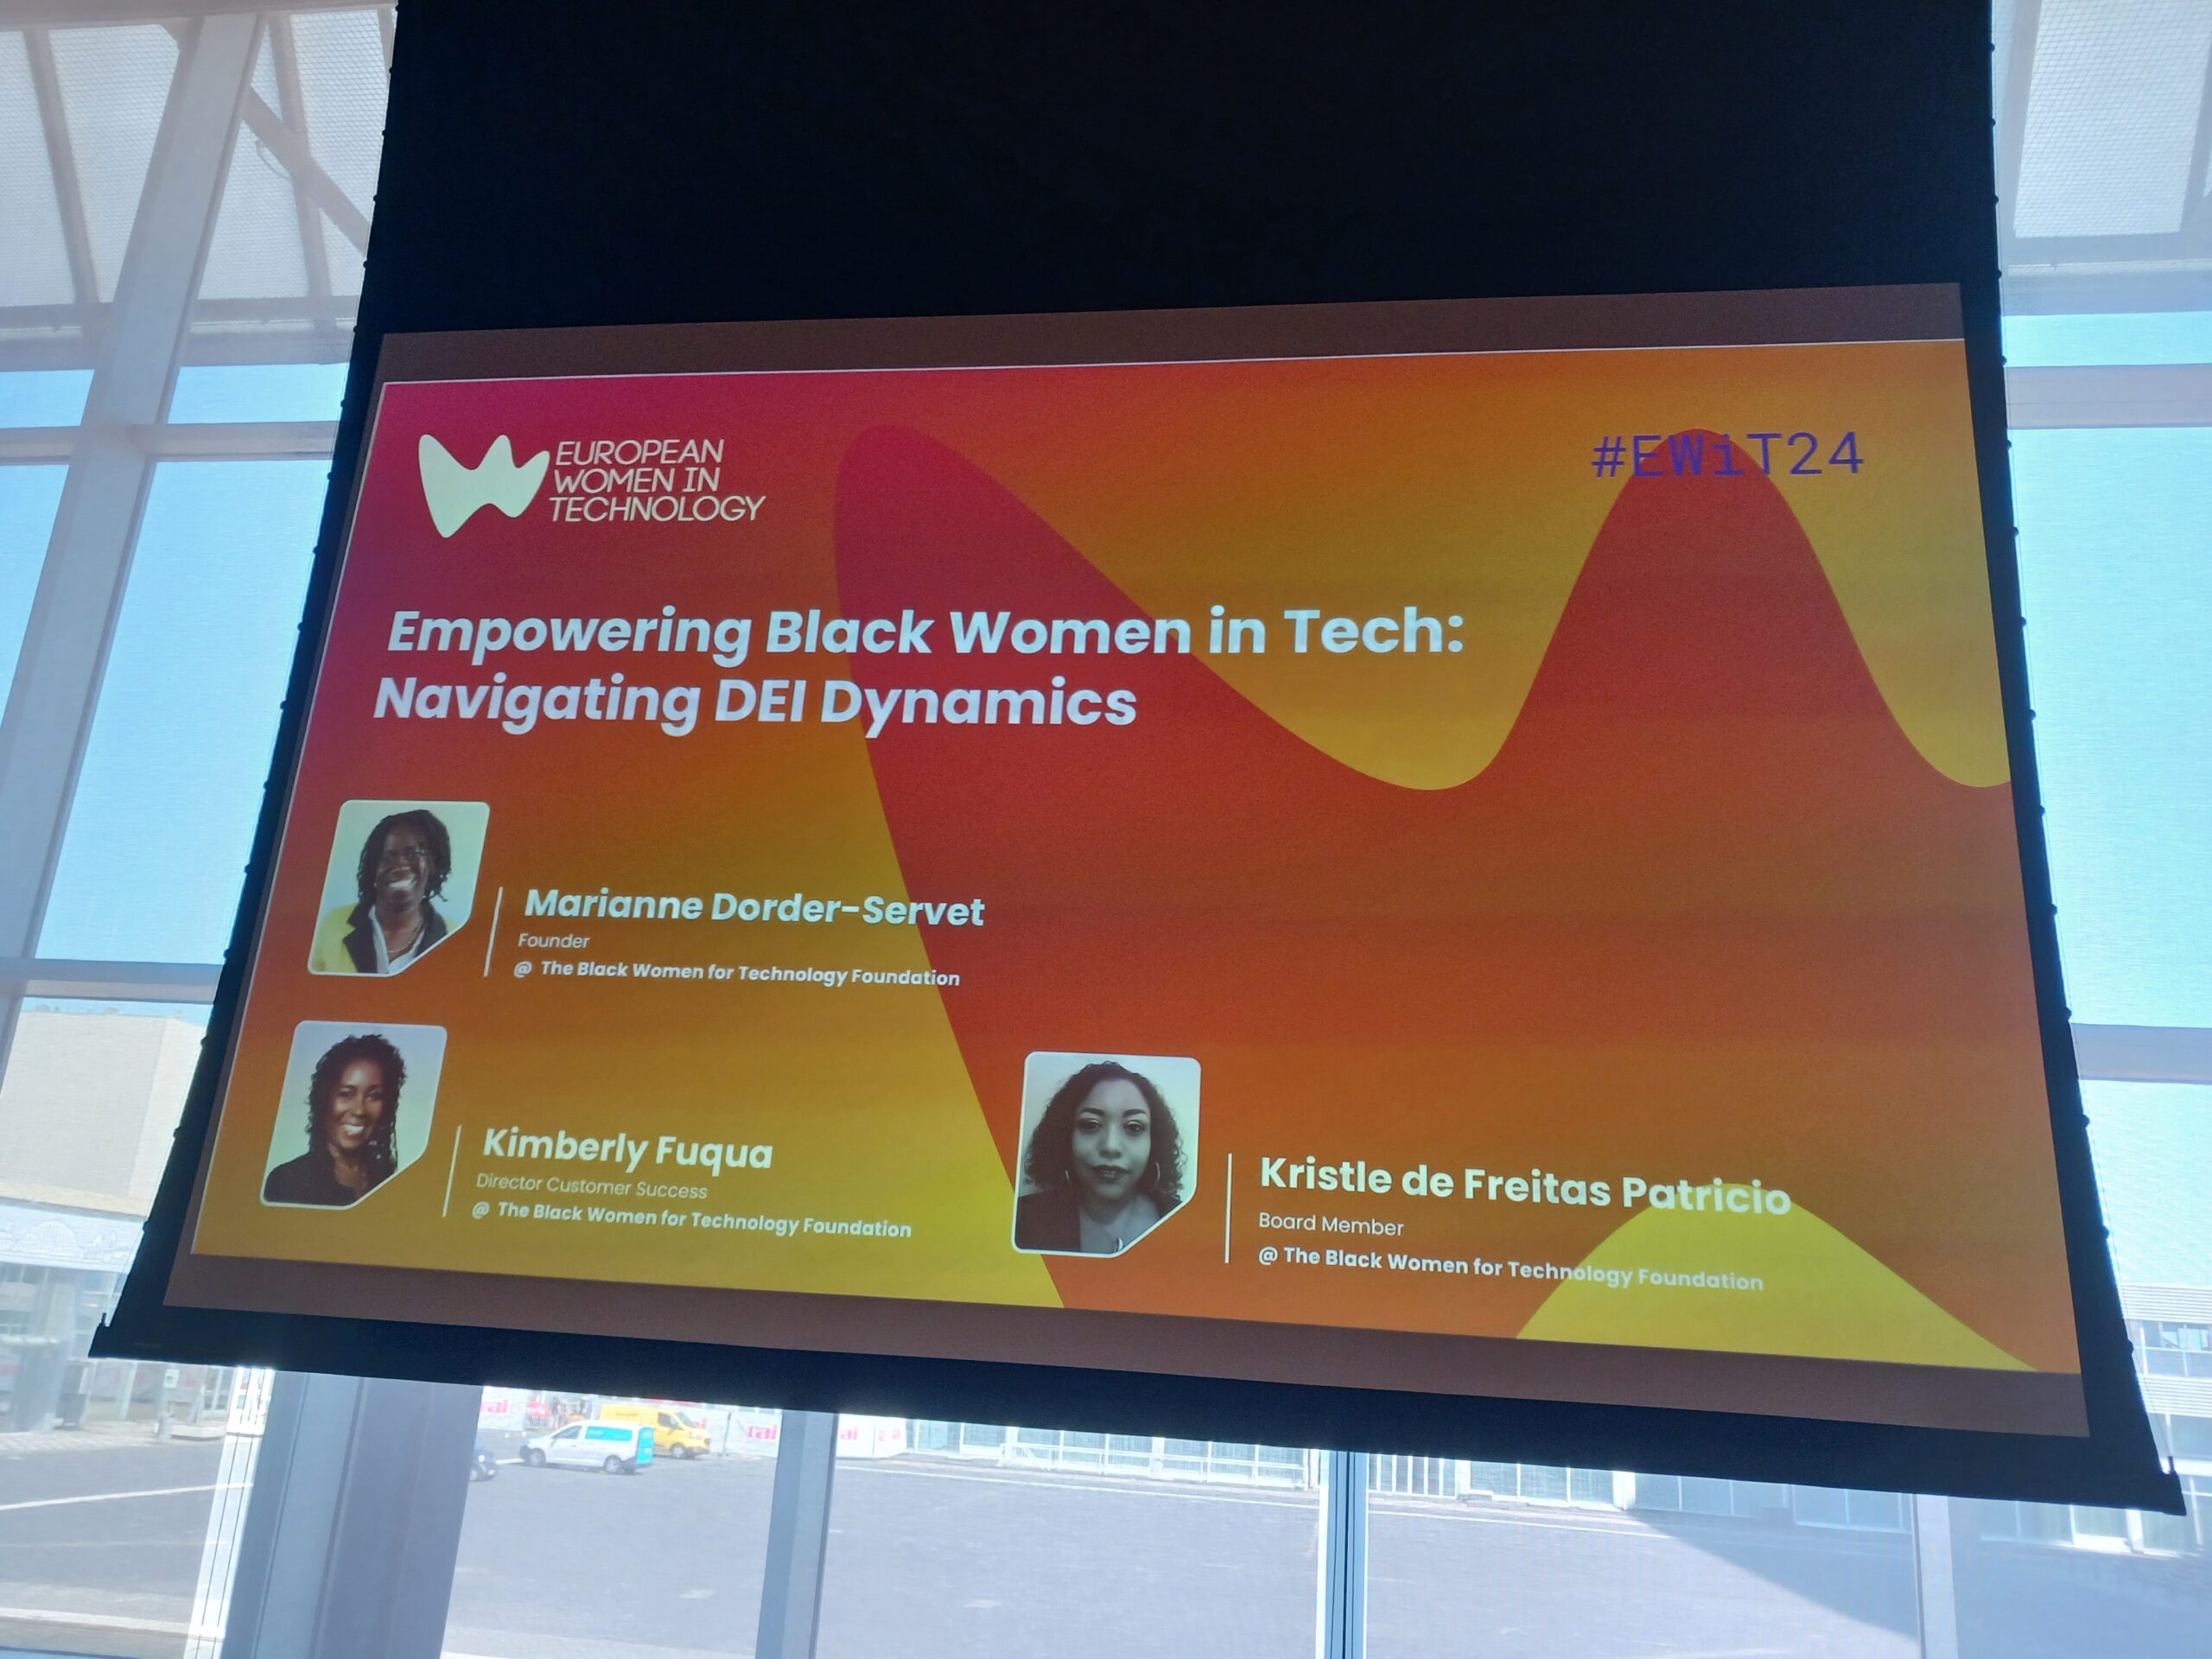 Our team performance at European Women in Technology 2024 was beyond expectations!